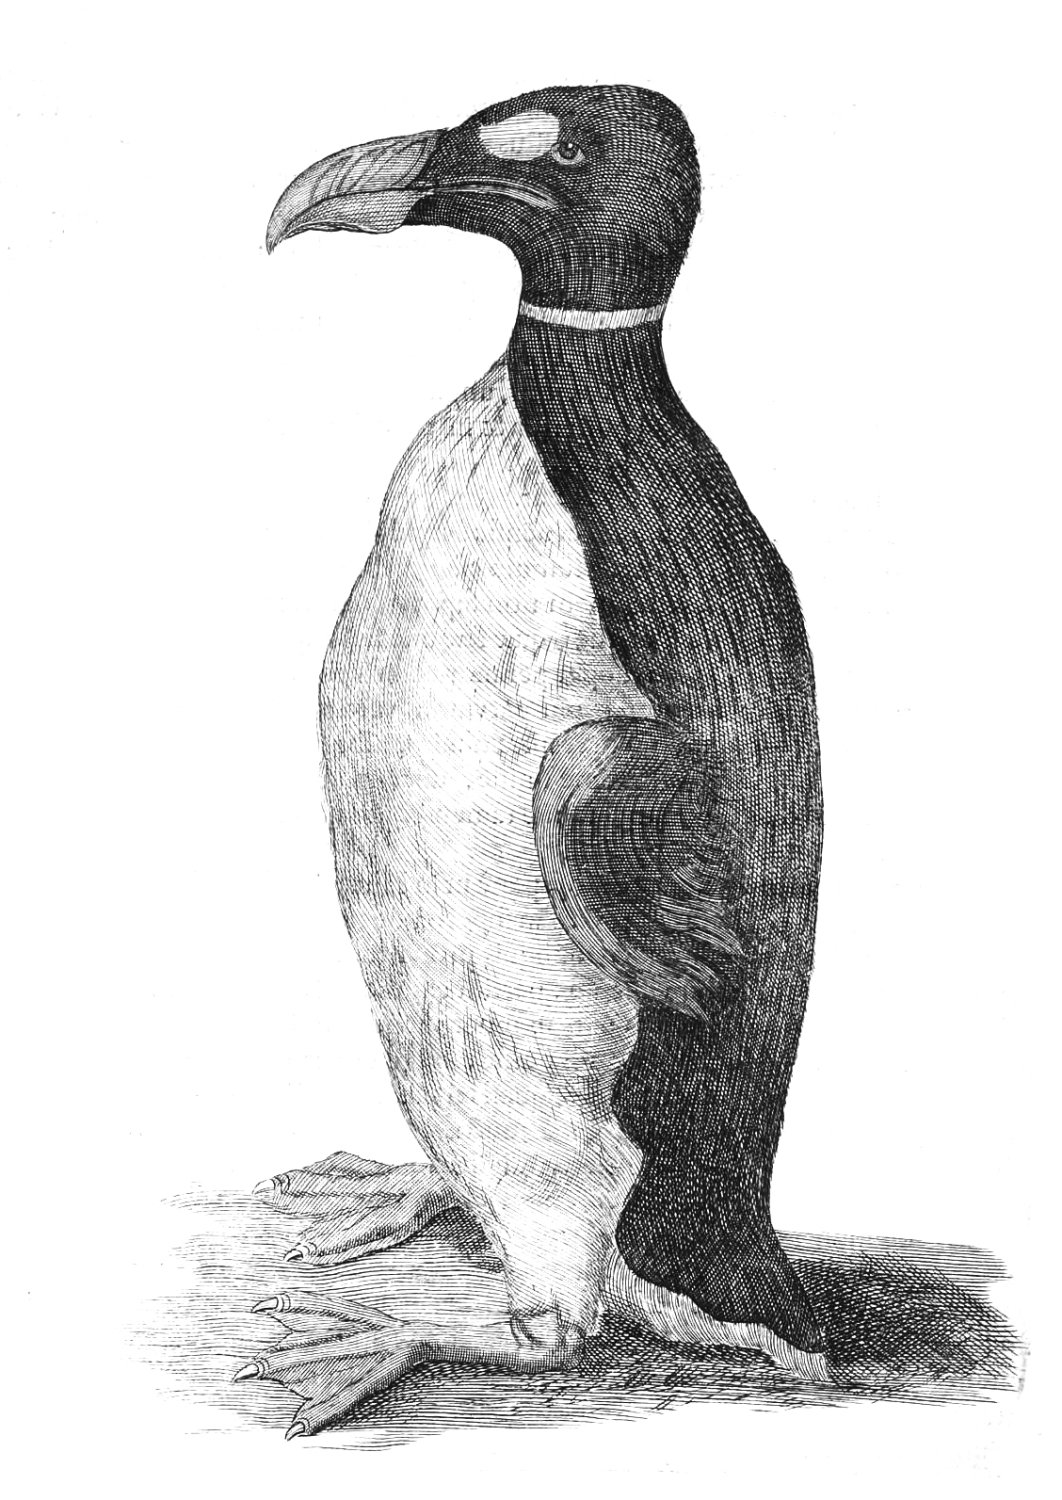 The only known illustration of a great auk drawn from life, Ole Worm's pet (1655)